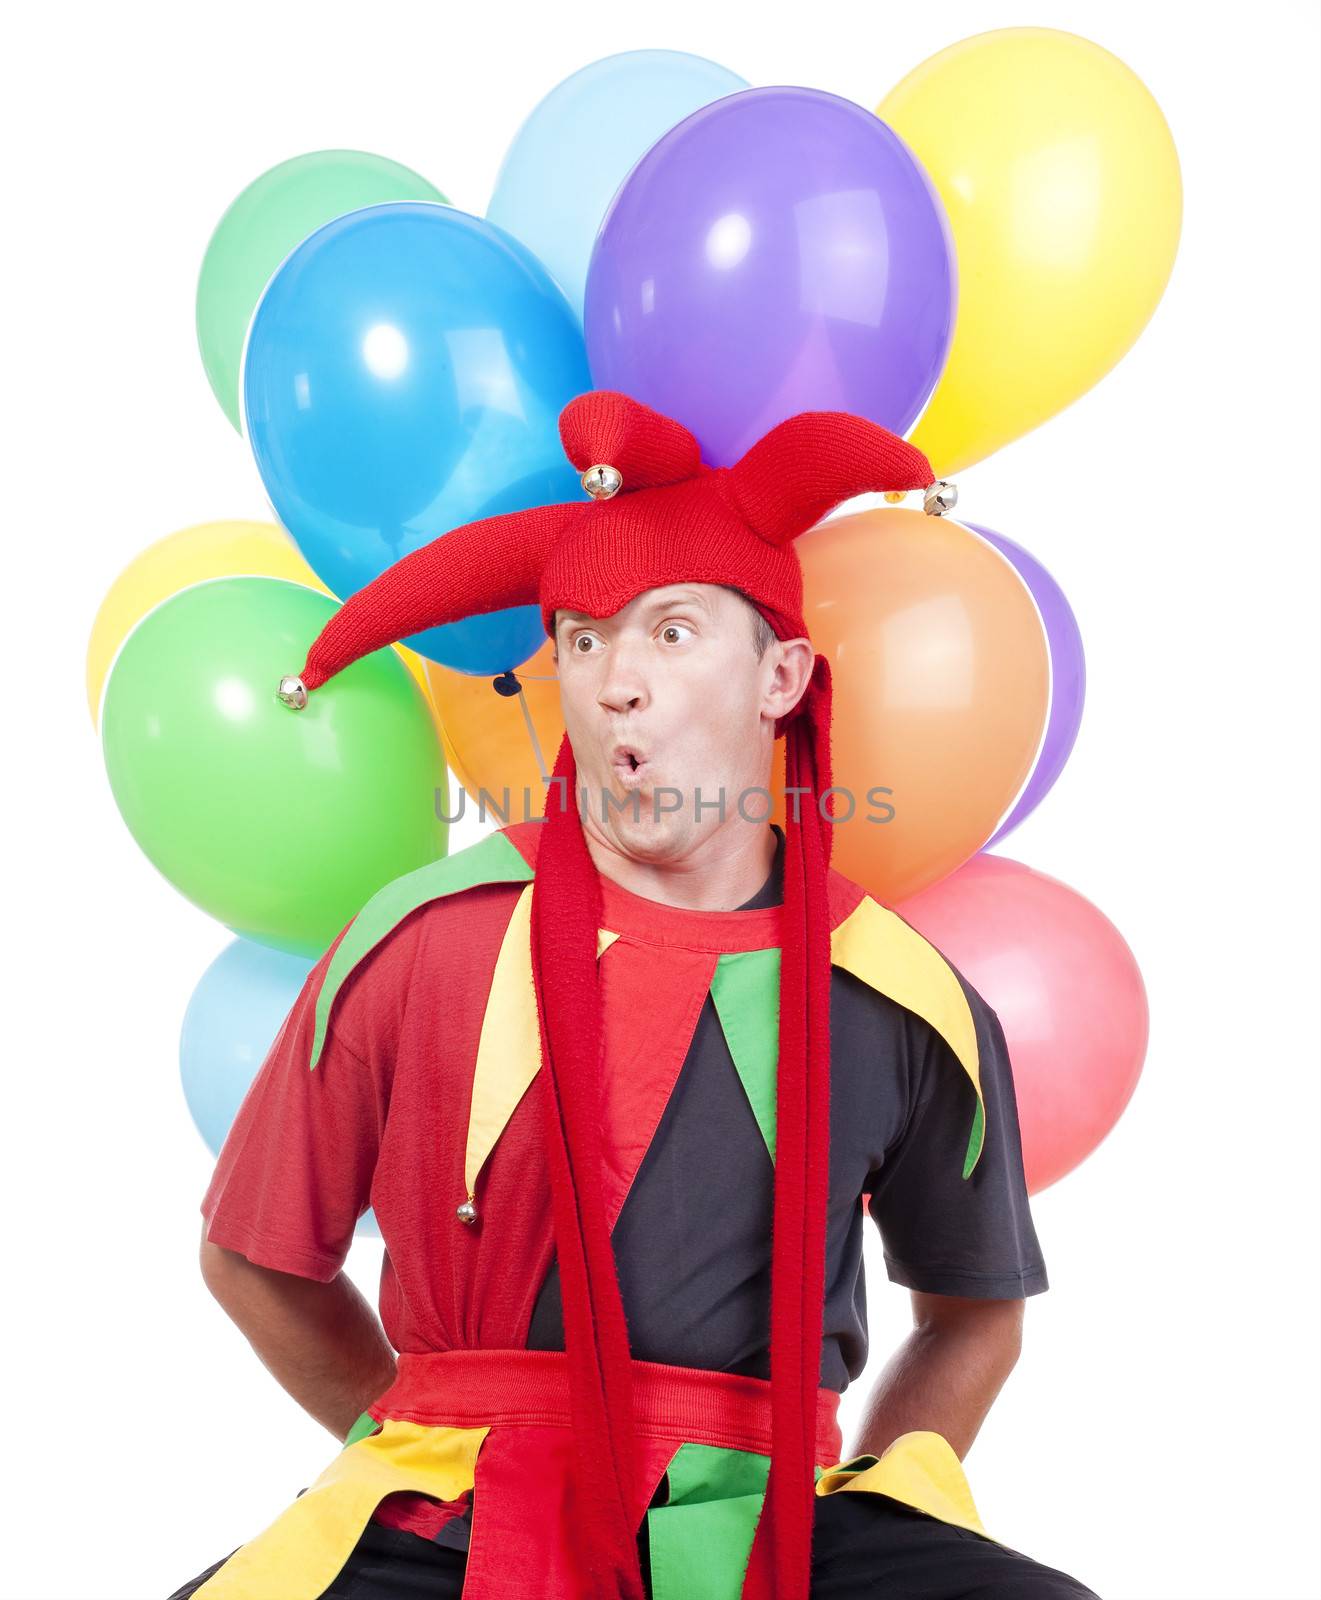 jester - entertaining figure in typical costume with colorful balloons